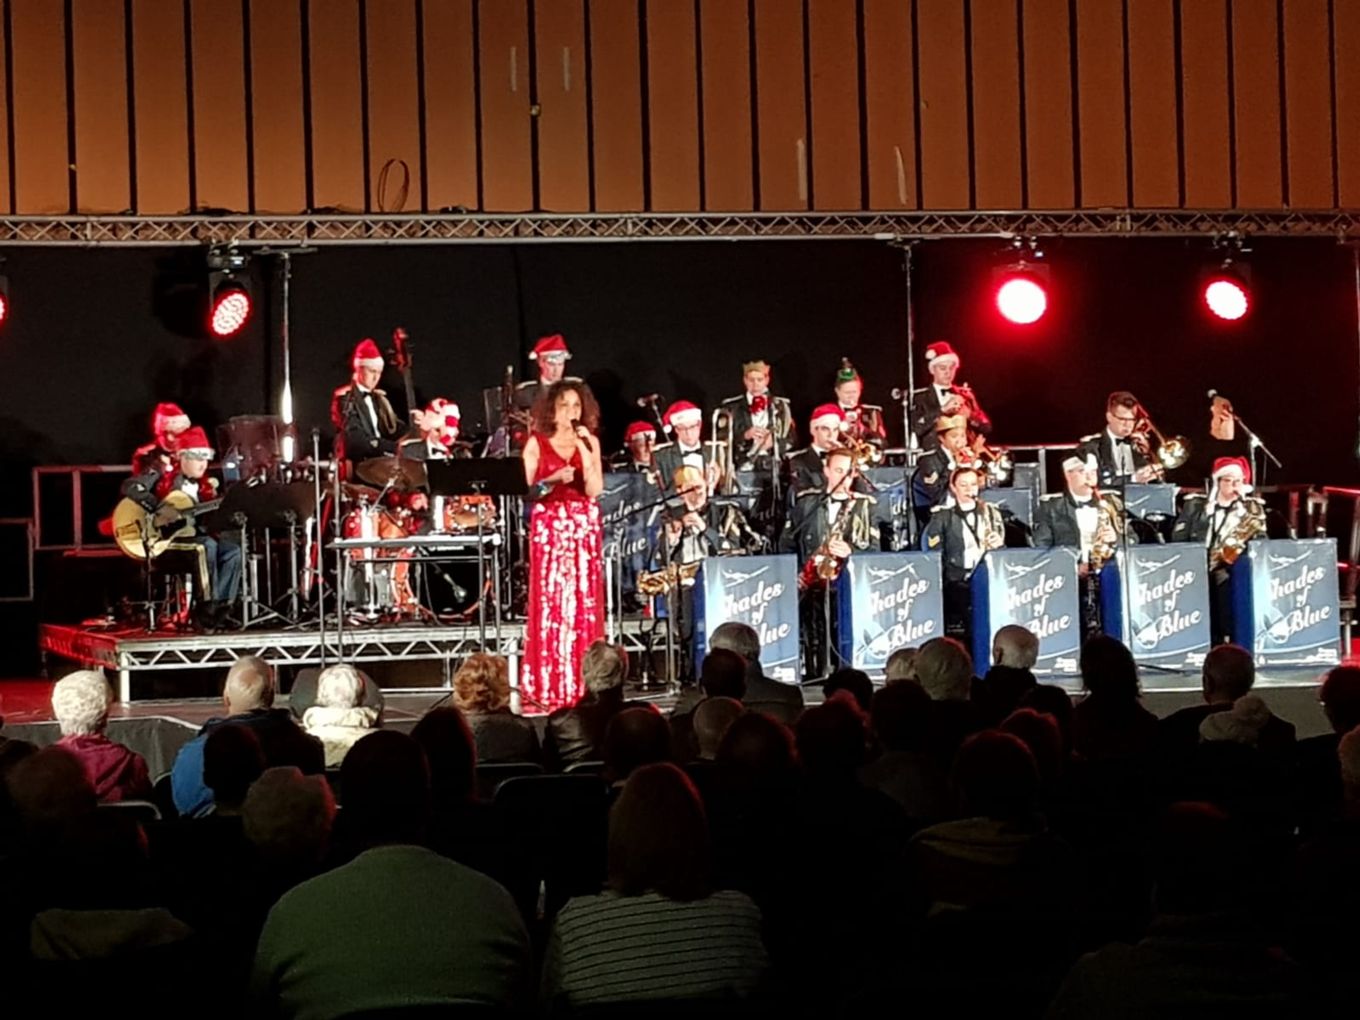 RAF Shades of Blue Big Band perform a Christmas concert wearing uniform and Christmas hats.